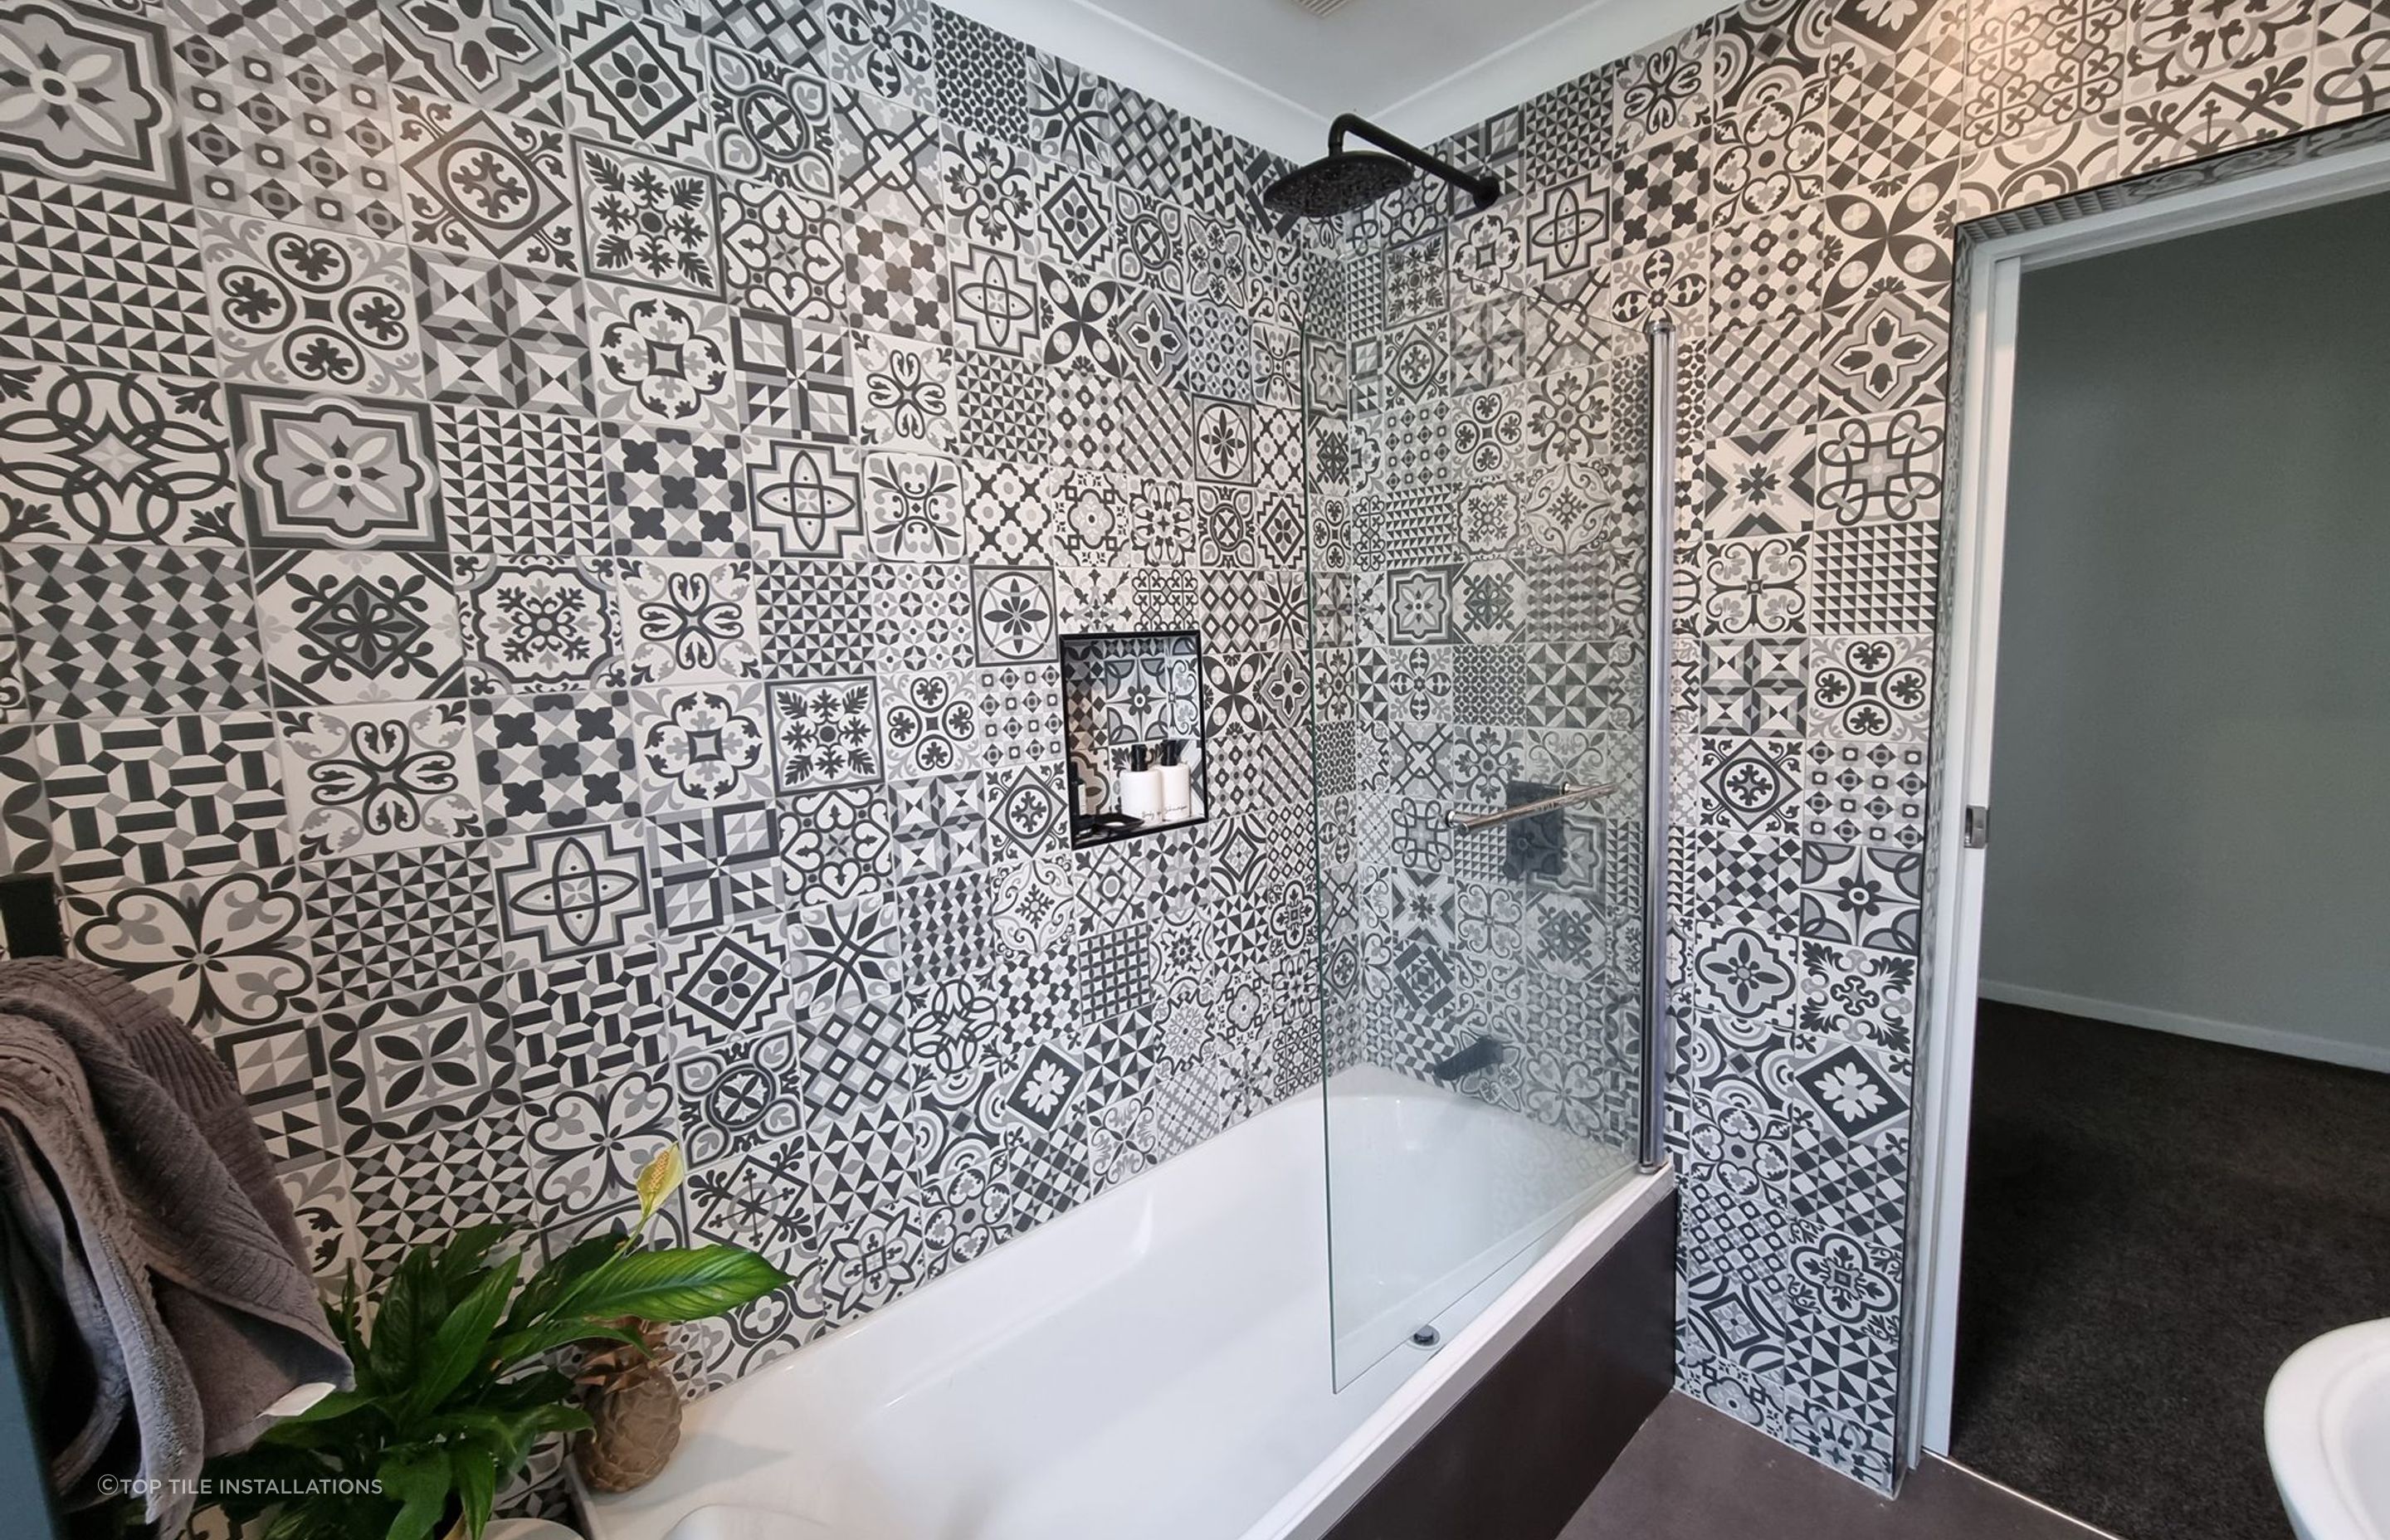 Stunning graphic tiles can mesmerise the eyes in the right hands.